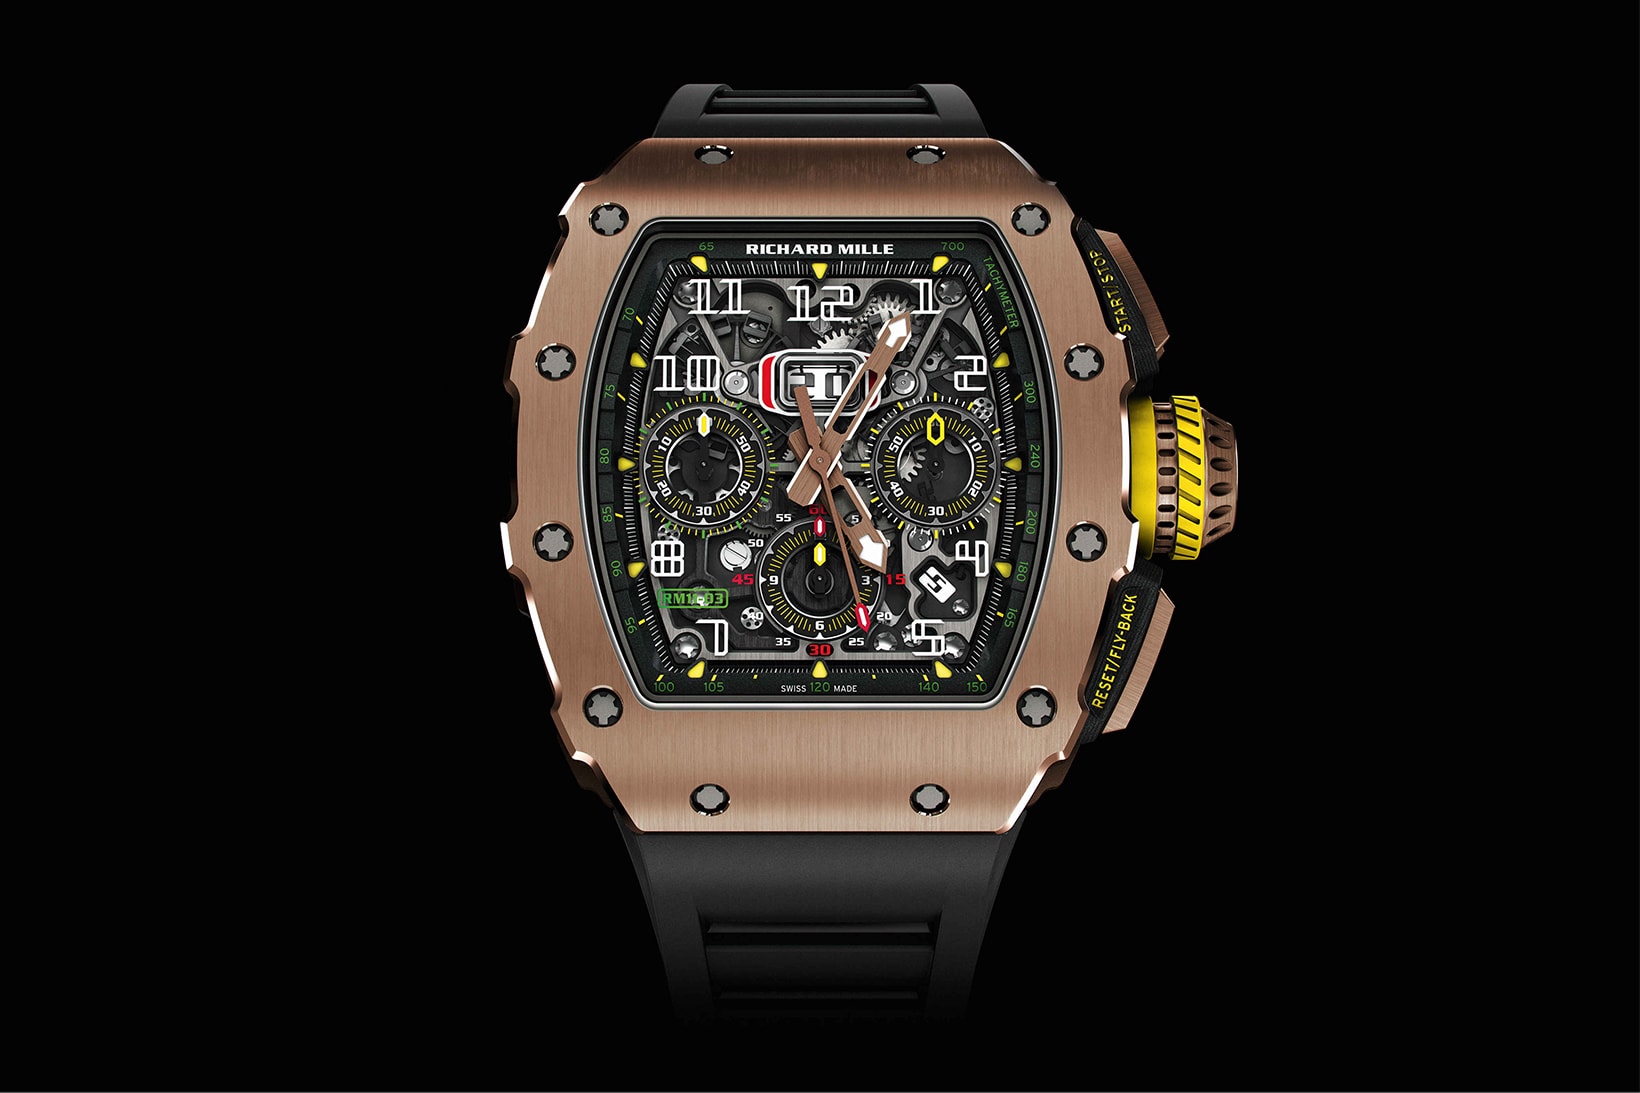 Richard Mille RM 11 03 Flyback Chronograph Watch